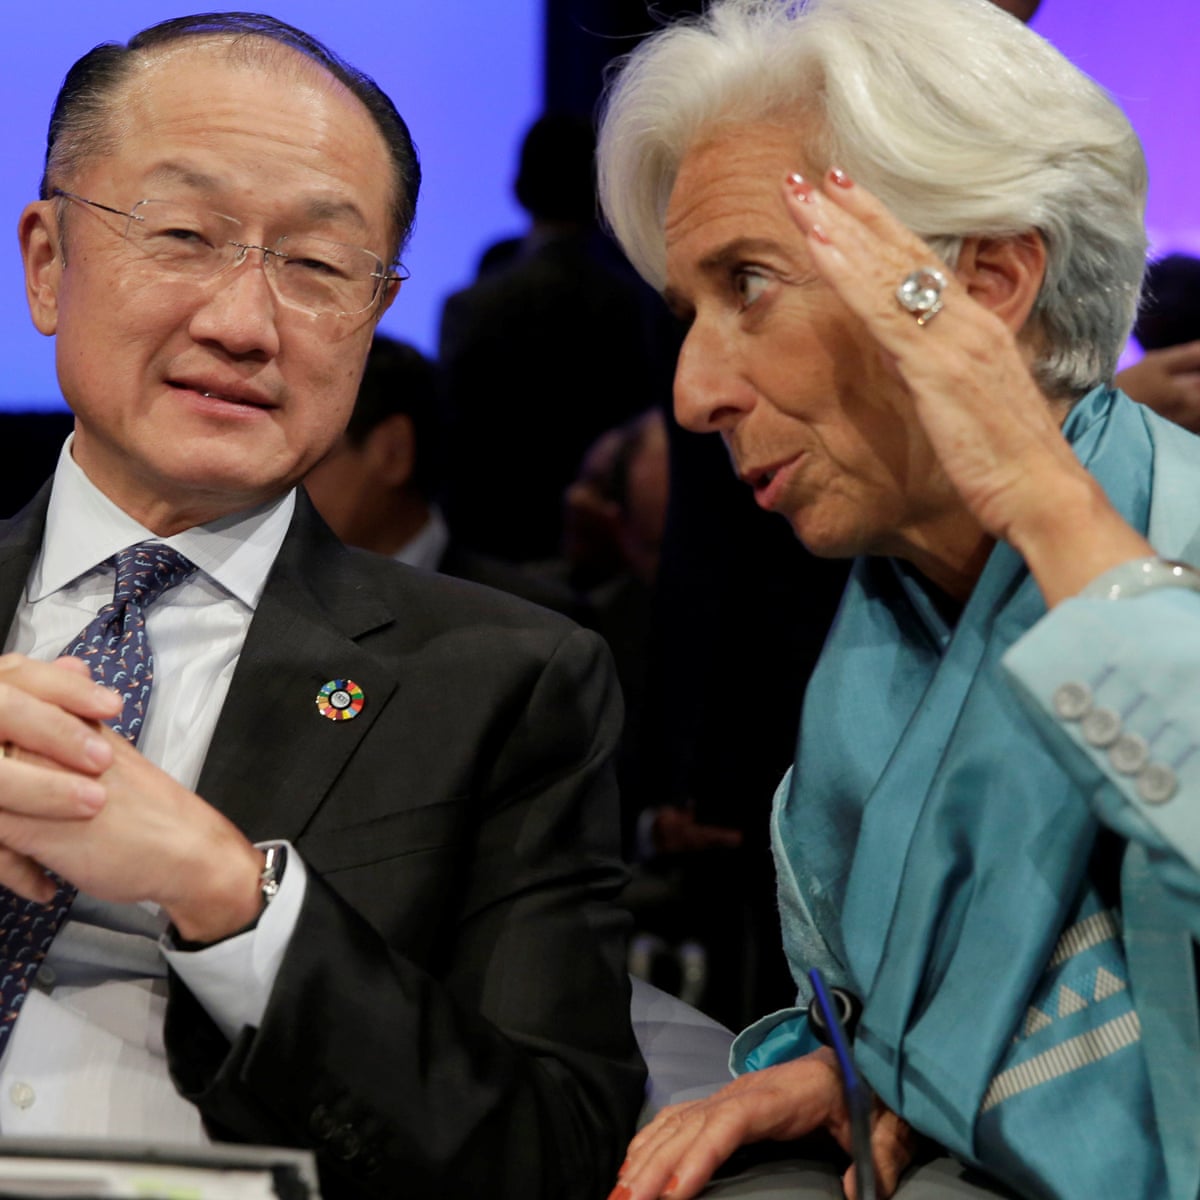 difference between imf and wb